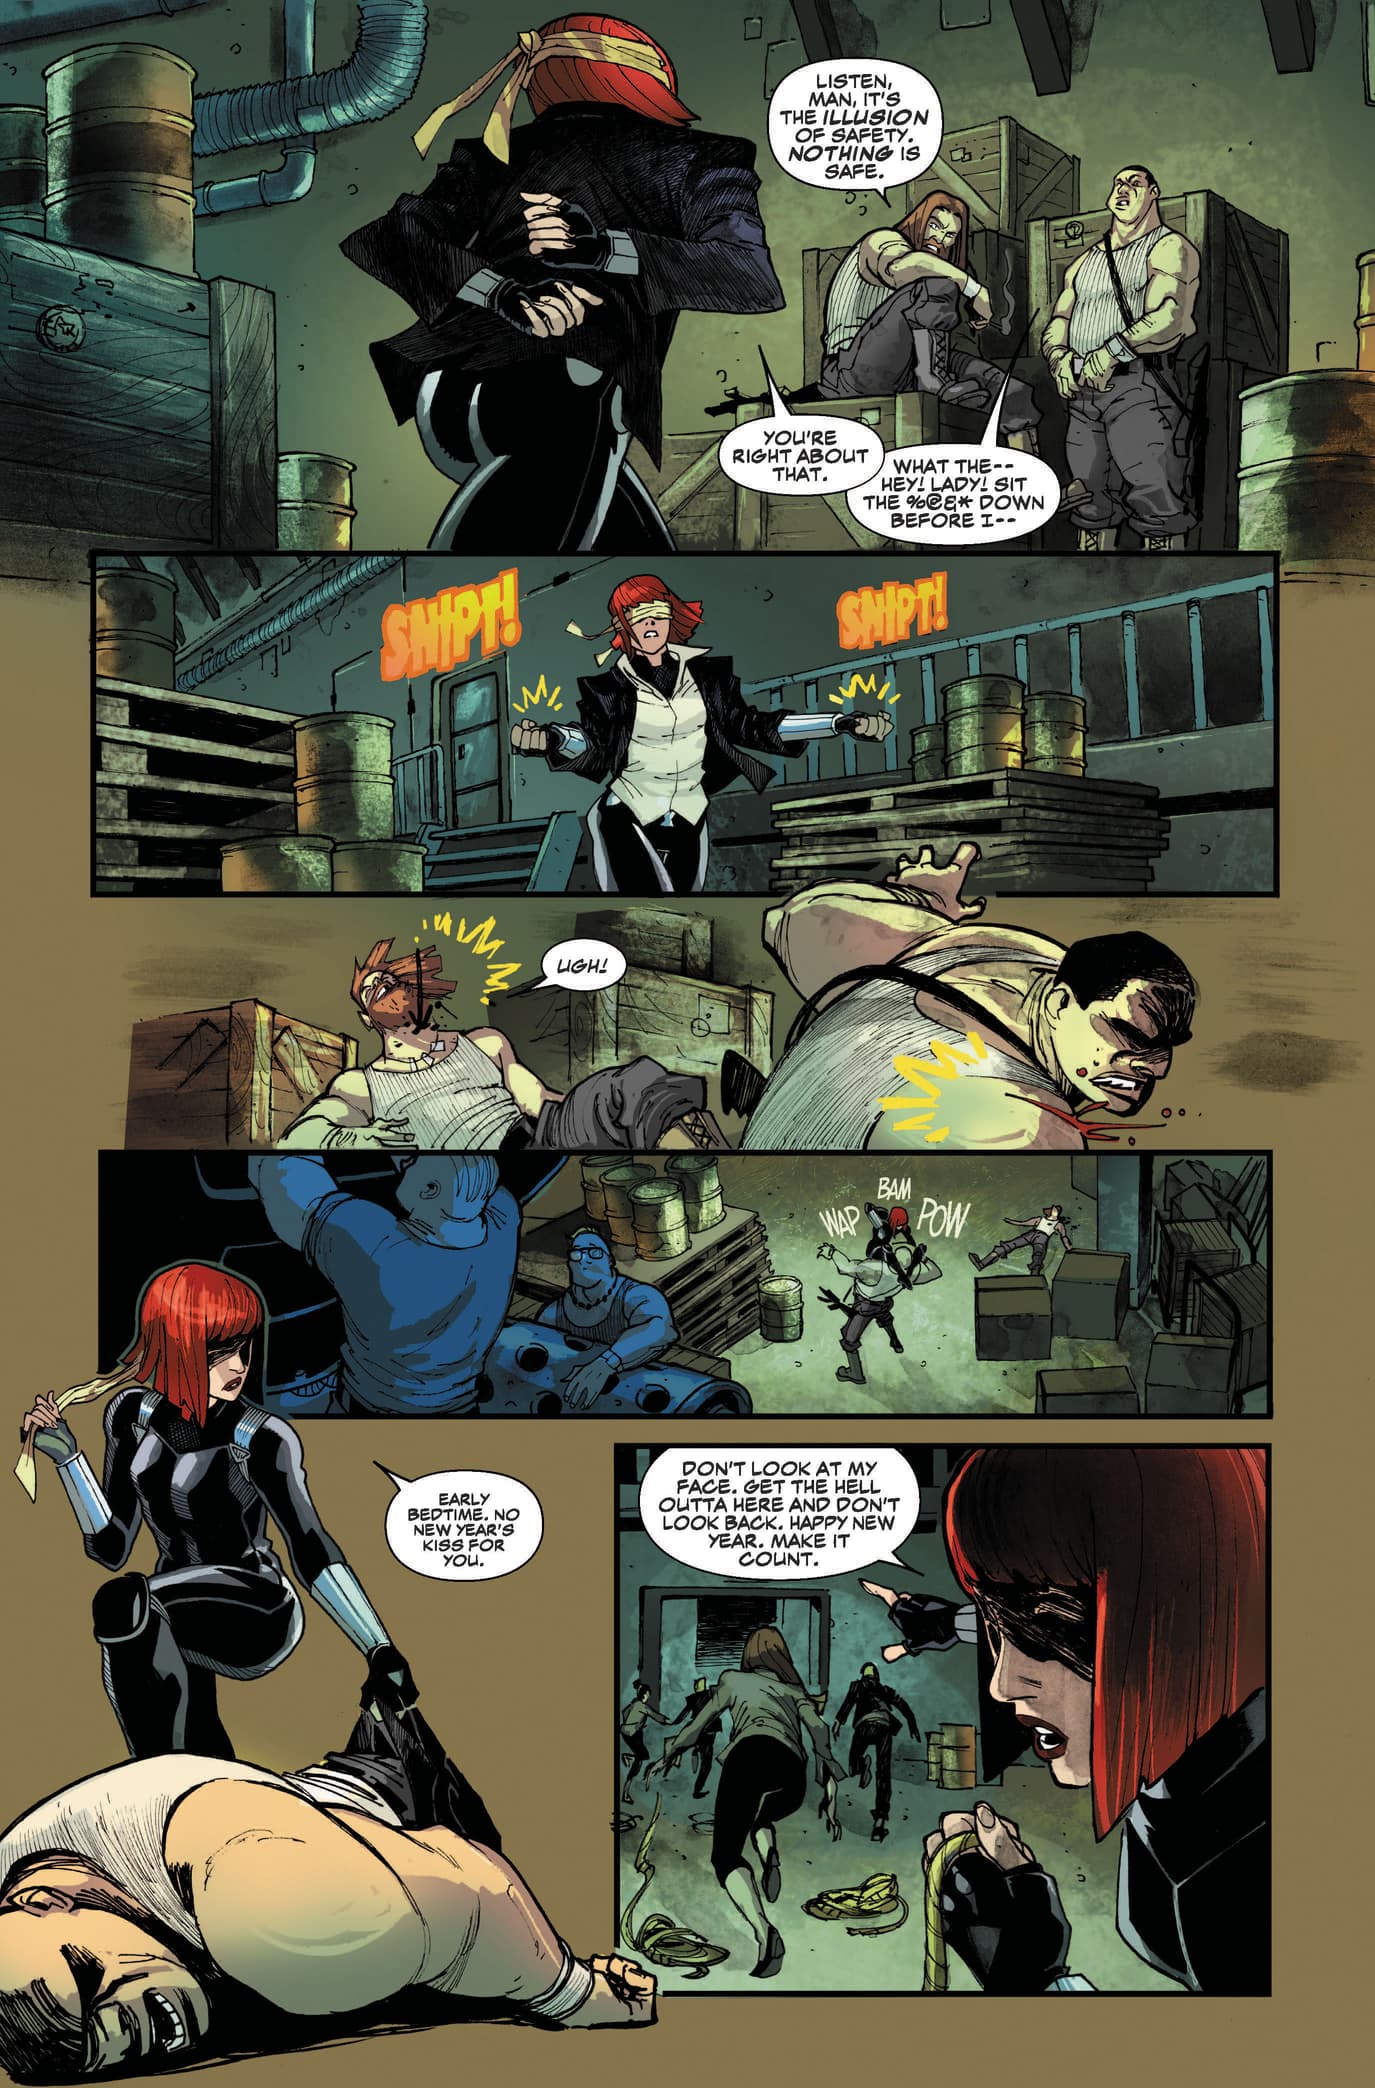 Preview page from Black Widow #1